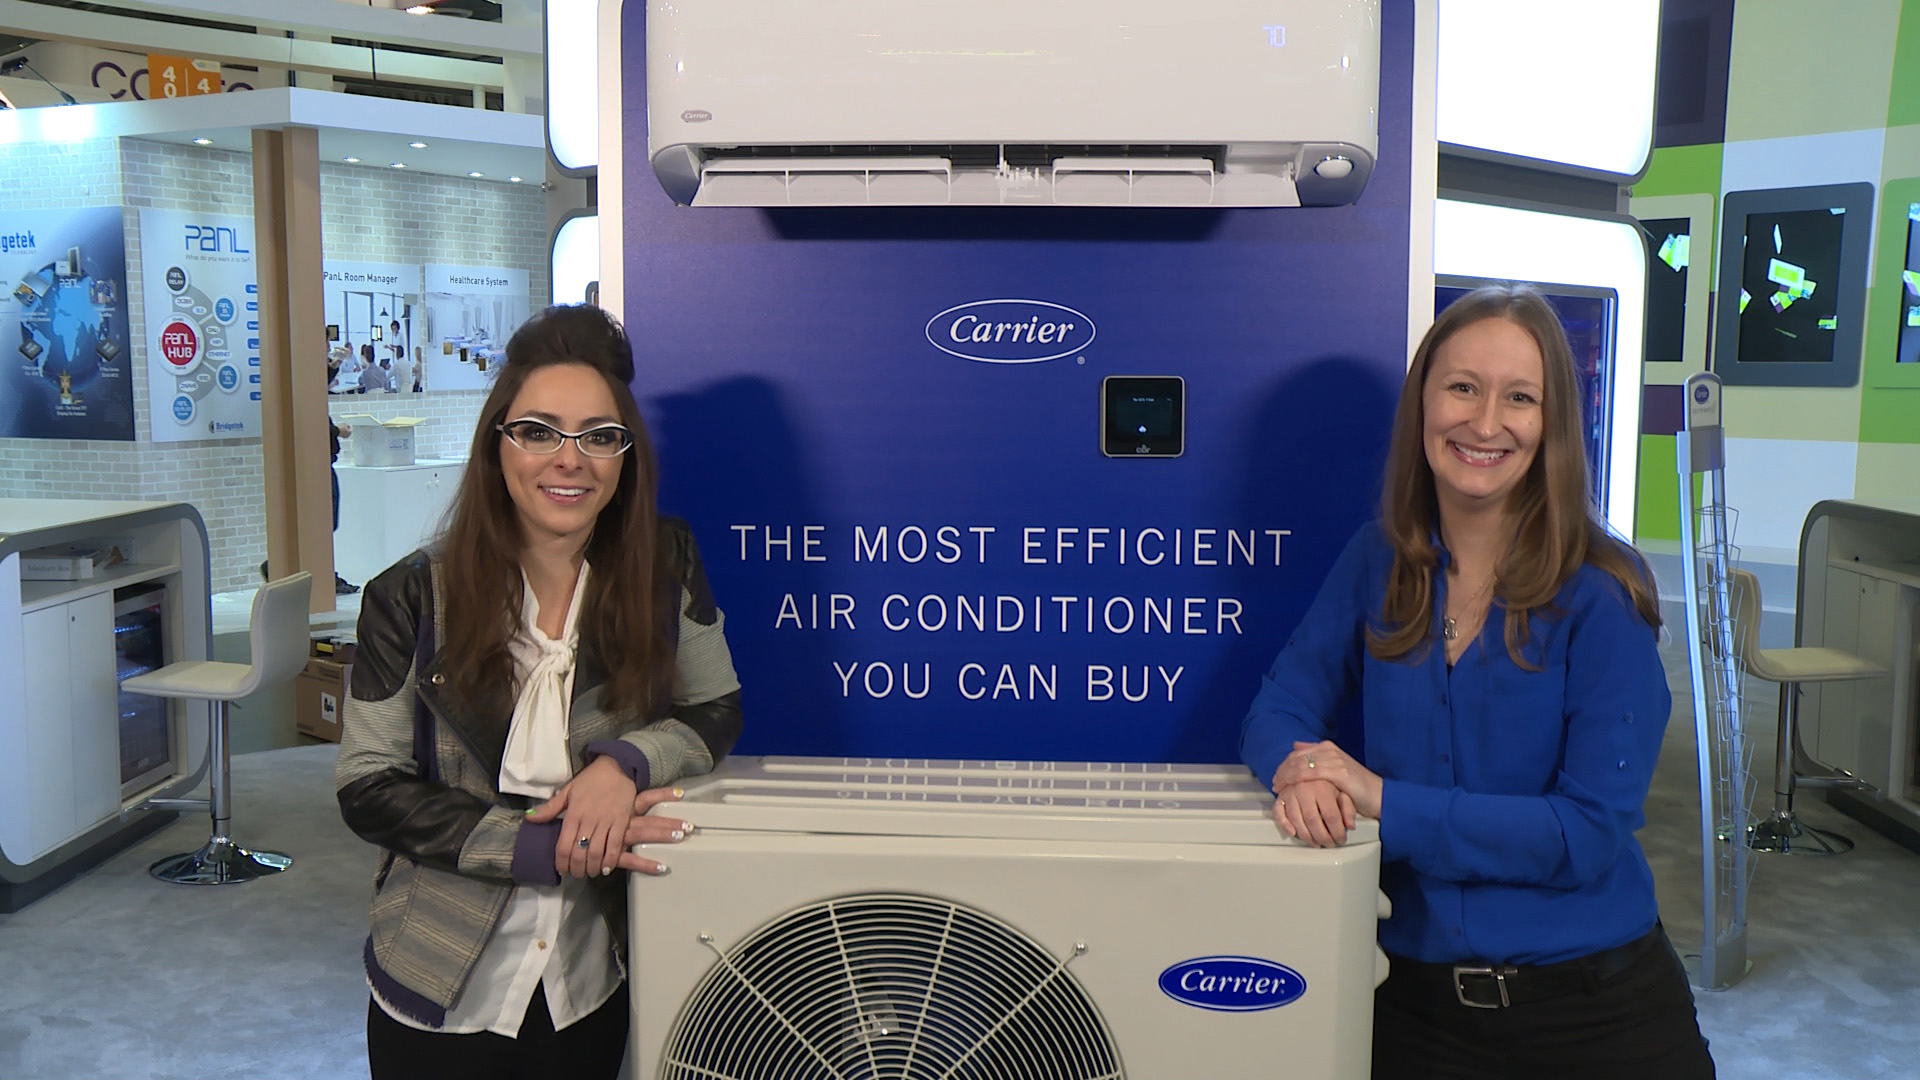 Tech expert Katie Linendoll, left, and Catie Sheppick, Carrier Brand Manager, introduced the most efficient air conditioner you can buy at the 2018 Consumer Electronics Show in Las Vegas this week. The 9,000 BTUh single-zone ductless system is rated at 42 SEER (seasonal energy efficiency ratio).